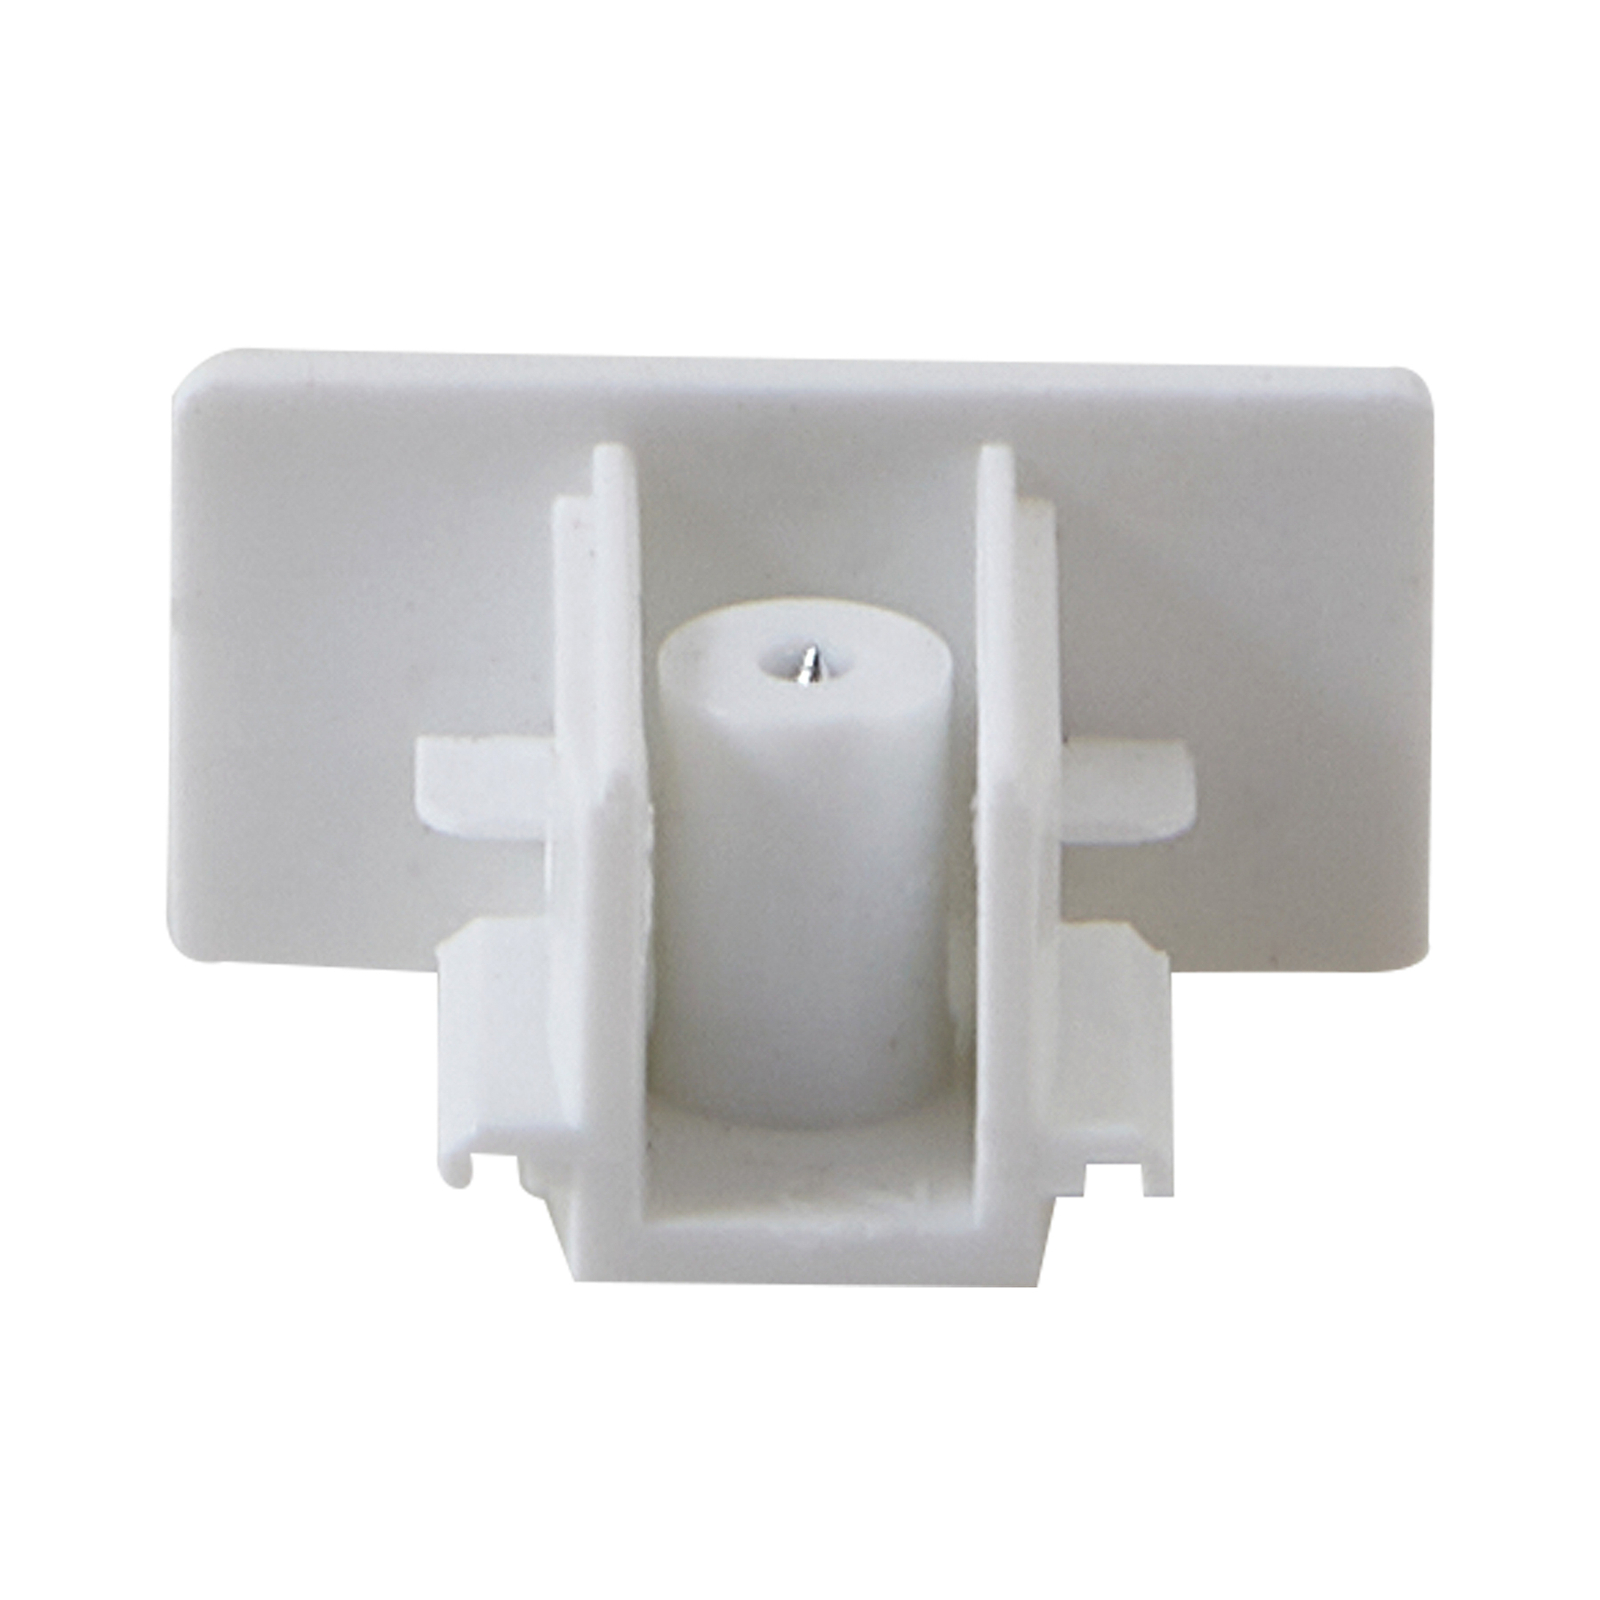 Lindby end cap Linaro, white, screw, single-circuit track lighting system